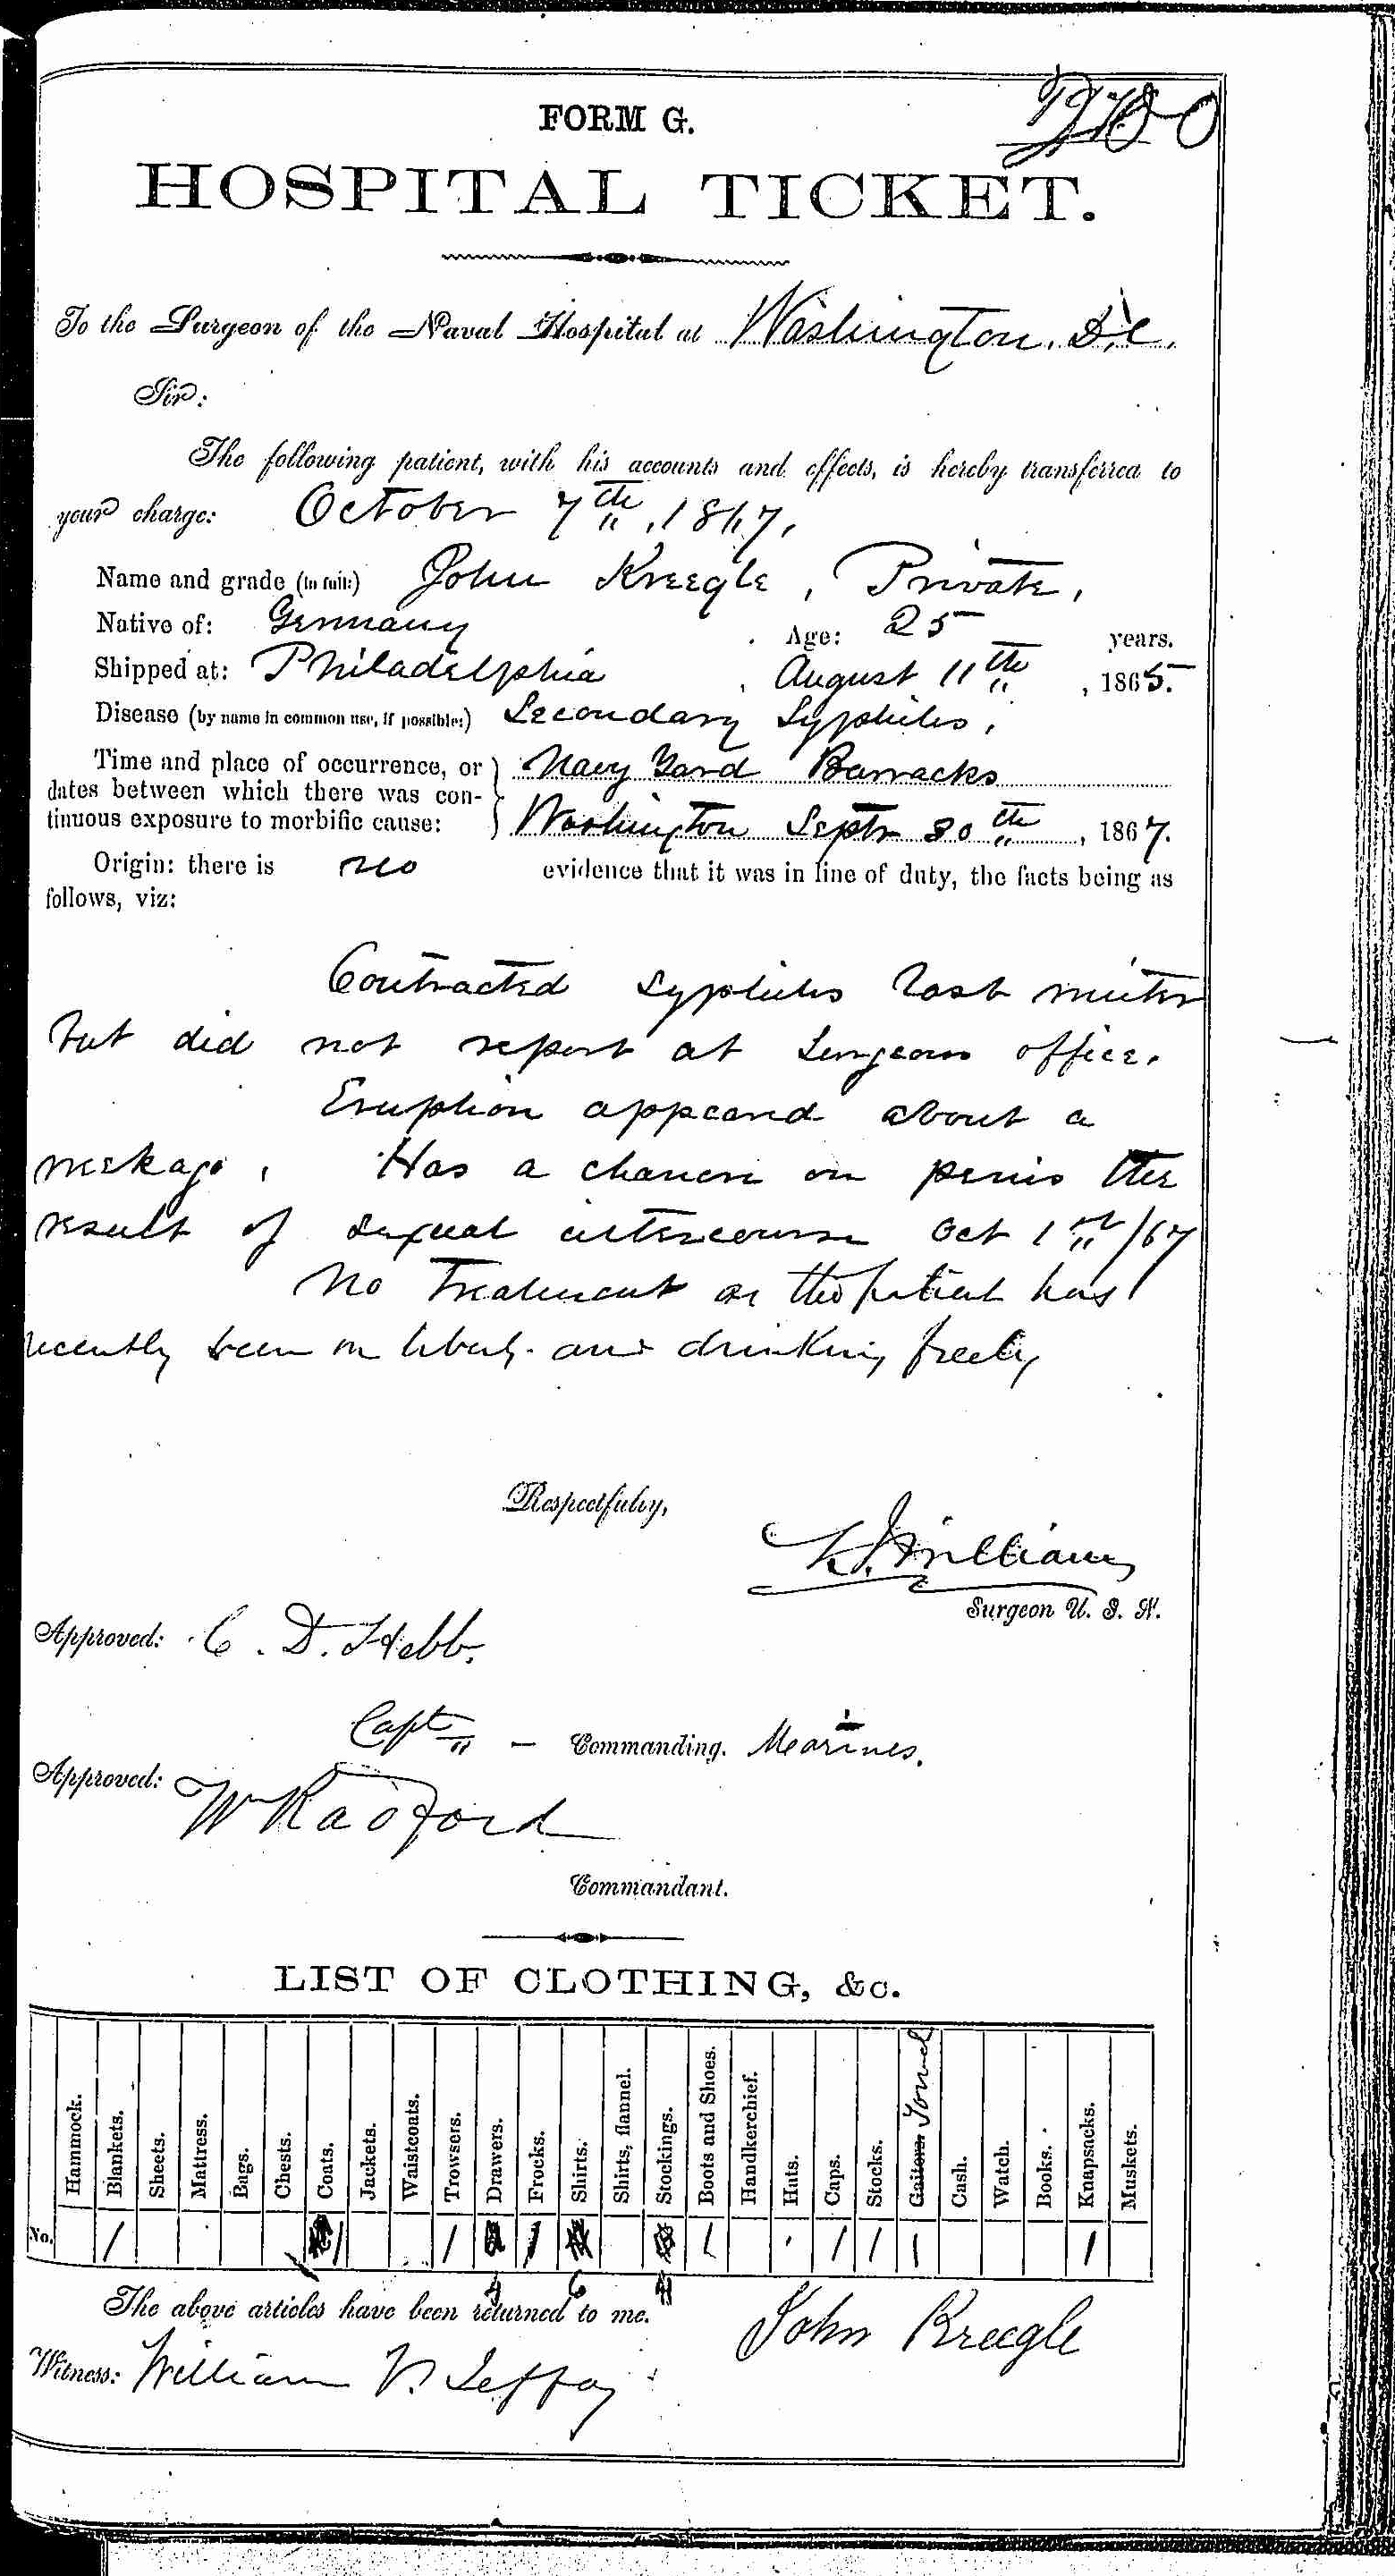 Entry for John Kreegle (page 1 of 2) in the log Hospital Tickets and Case Papers - Naval Hospital - Washington, D.C. - 1866-68